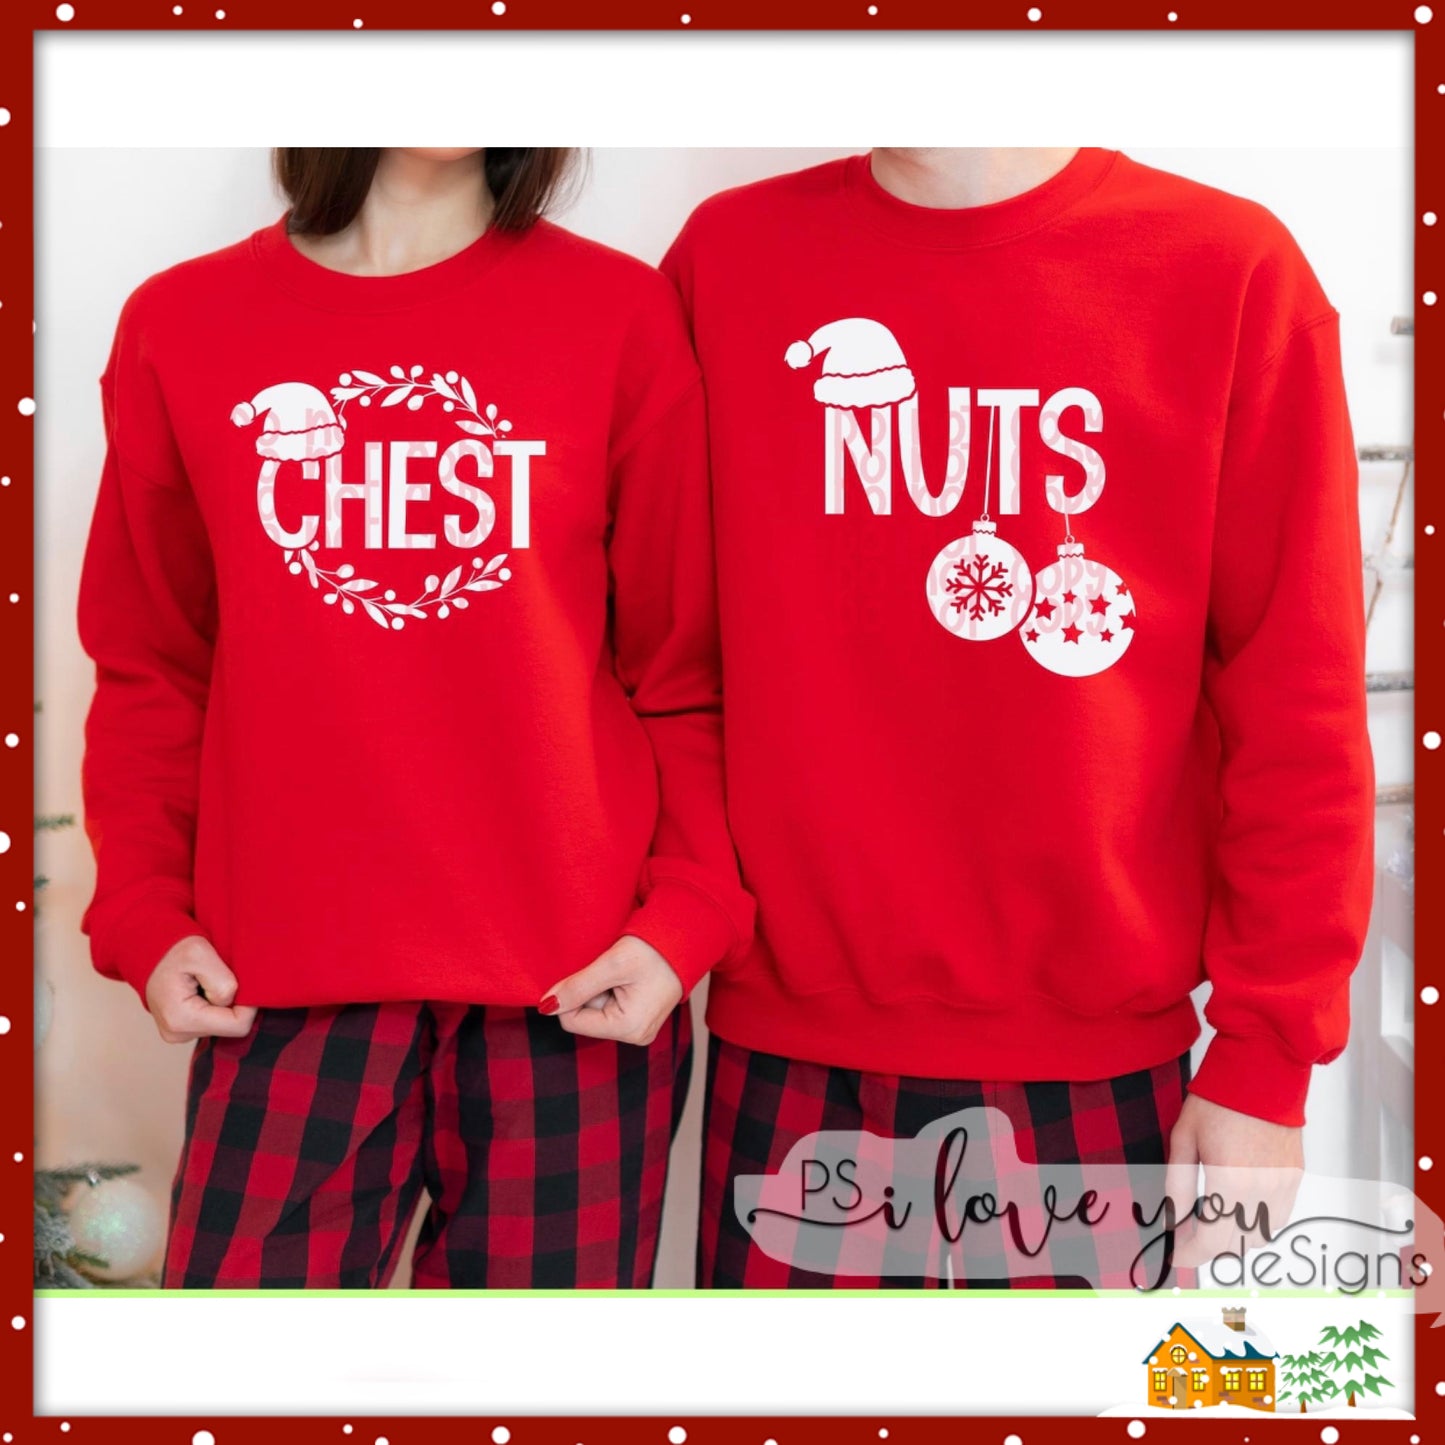 Chest and Nuts Christmas Tees